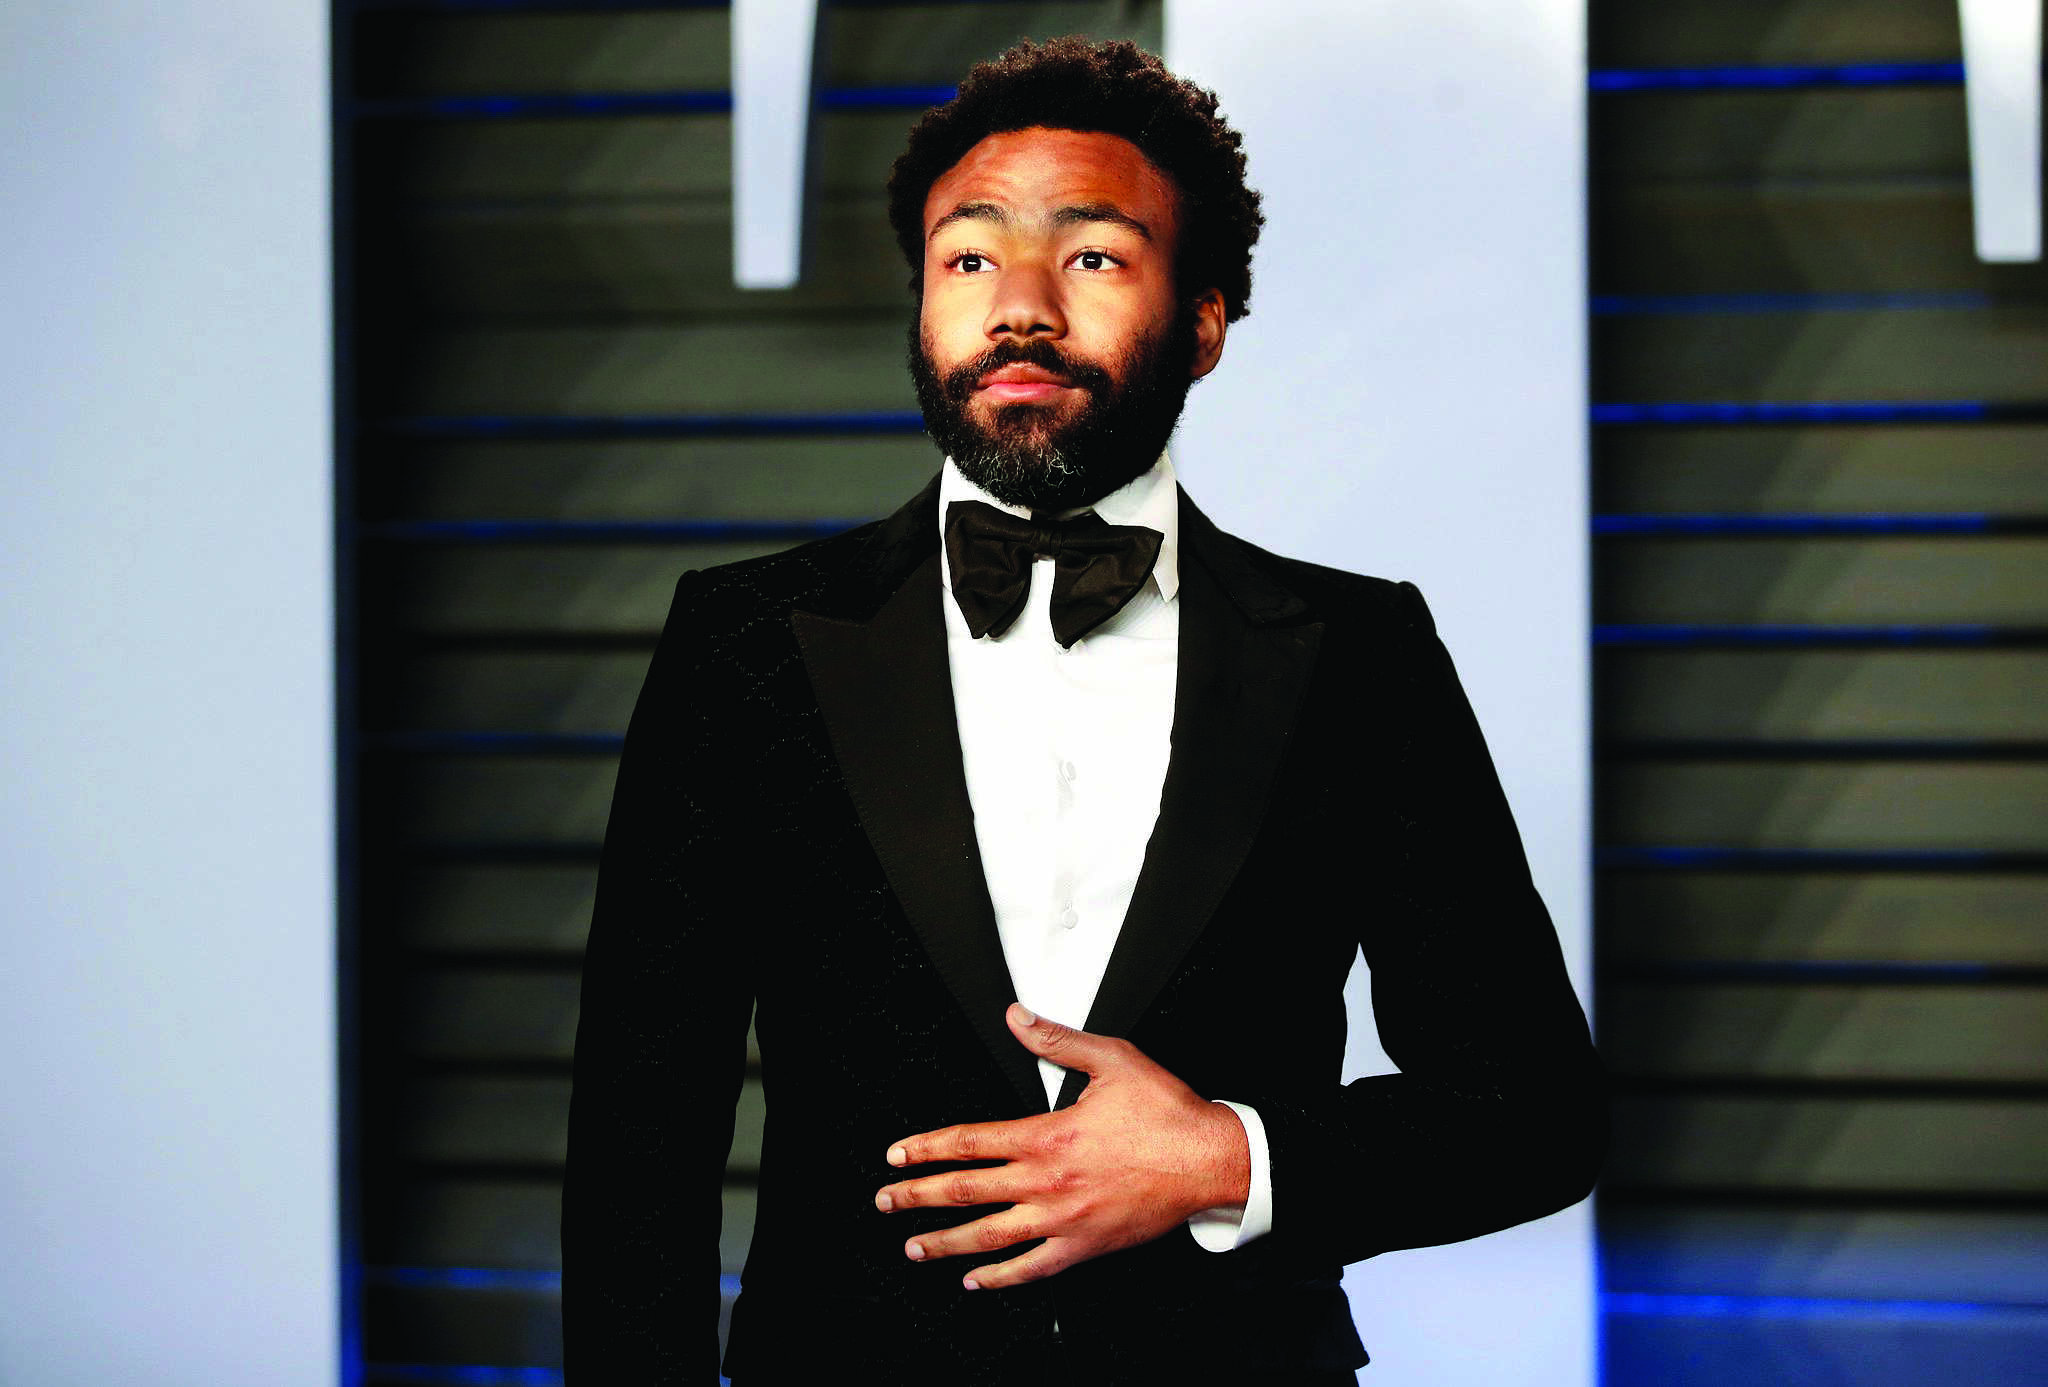 Donald Glover and Atlanta writers racially harassed